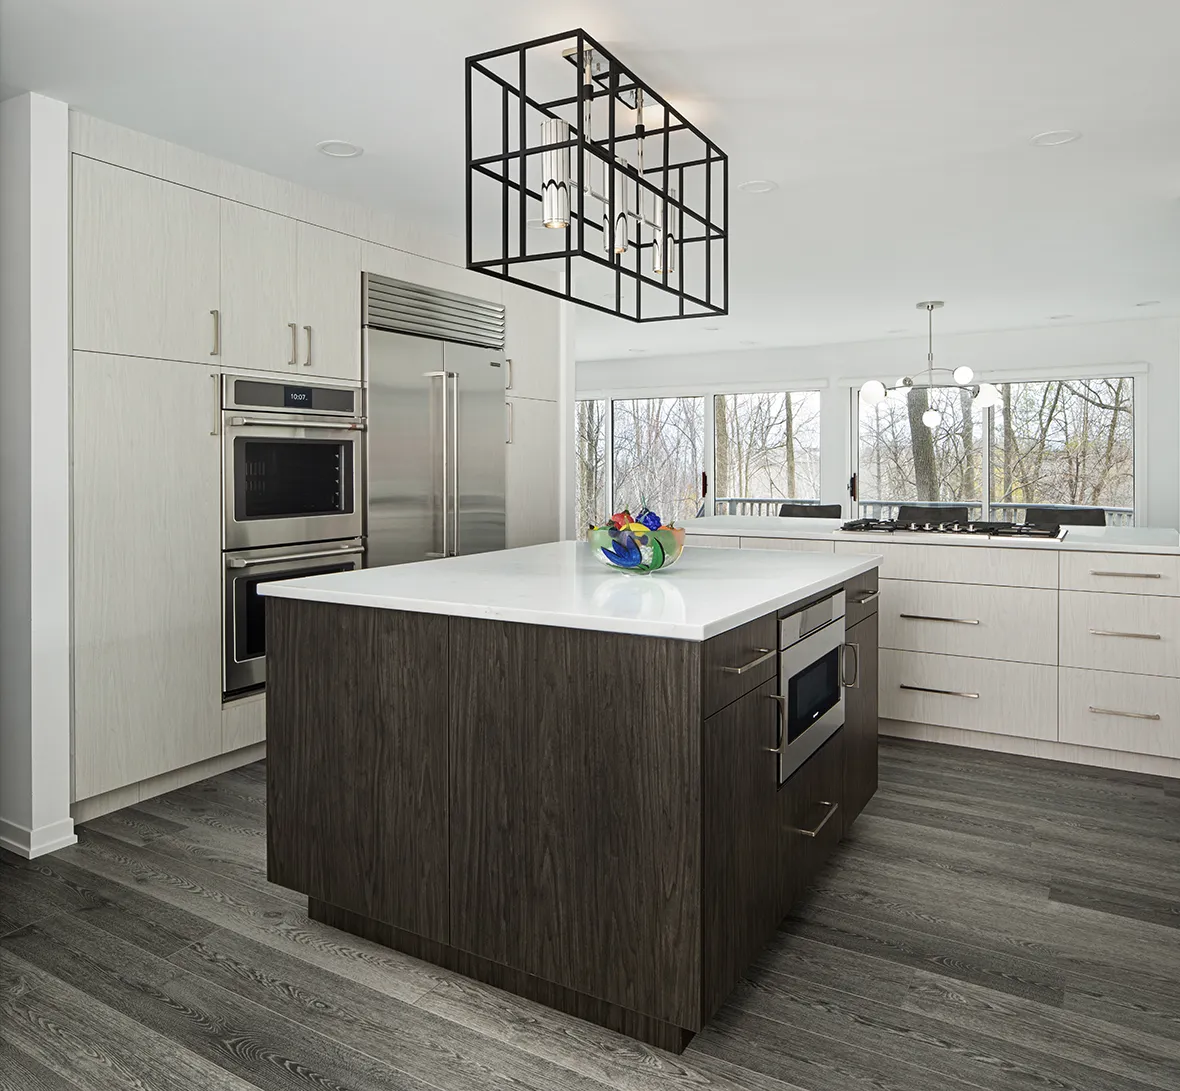 Forest Hill Diamond Building New Kitchen Design Dark Wood and White Custom Cabinets